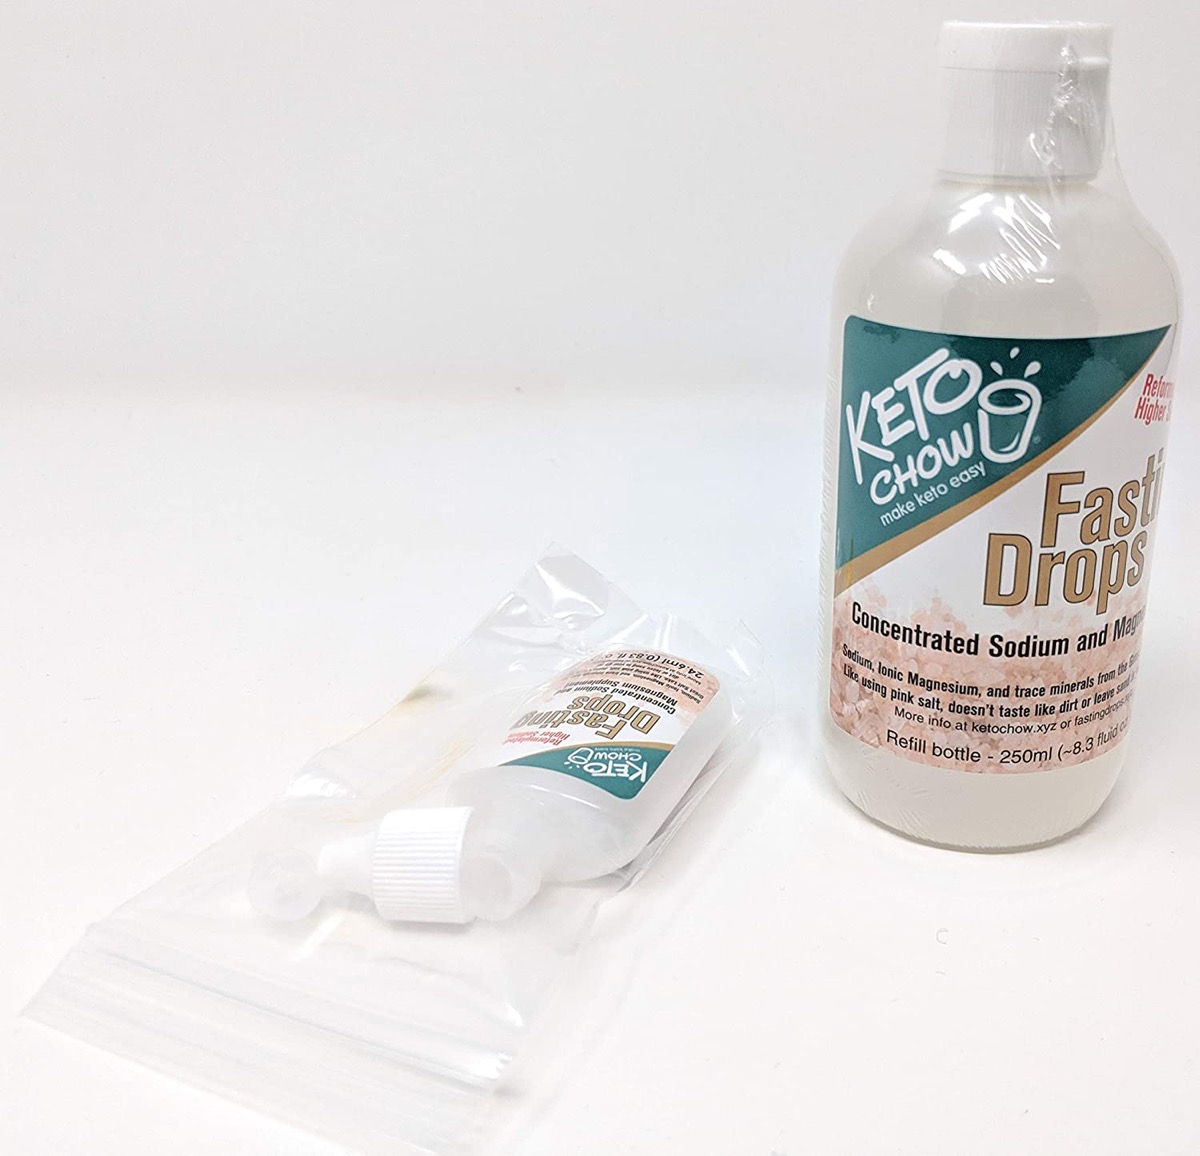 bottle of keto chow fasting drops on white background